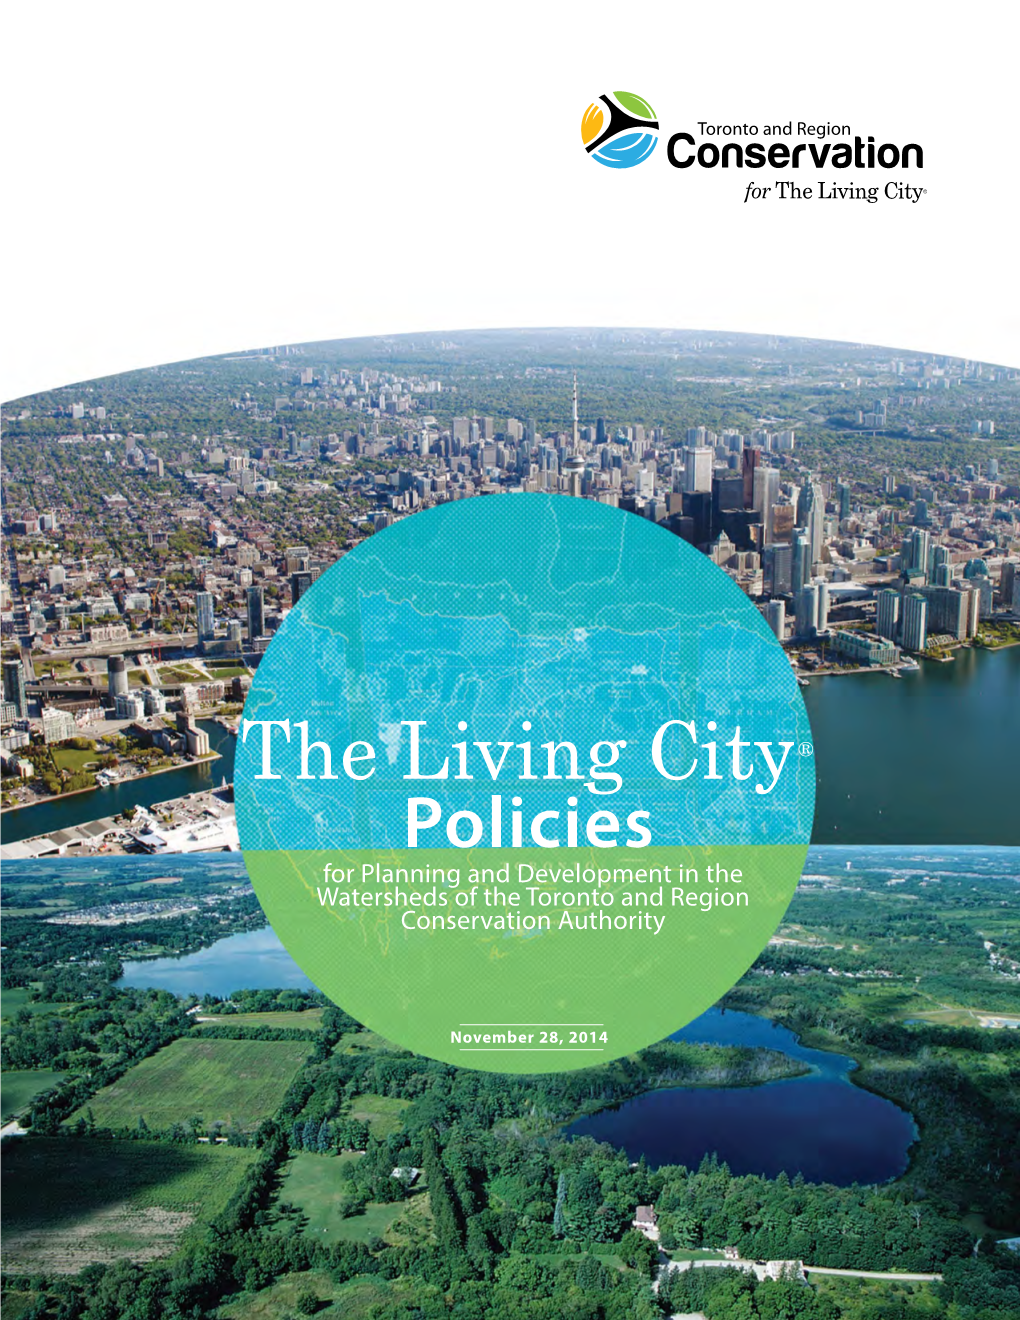 The Living City® Policies for Planning and Development in the Watersheds of the Toronto and Region Conservation Authority